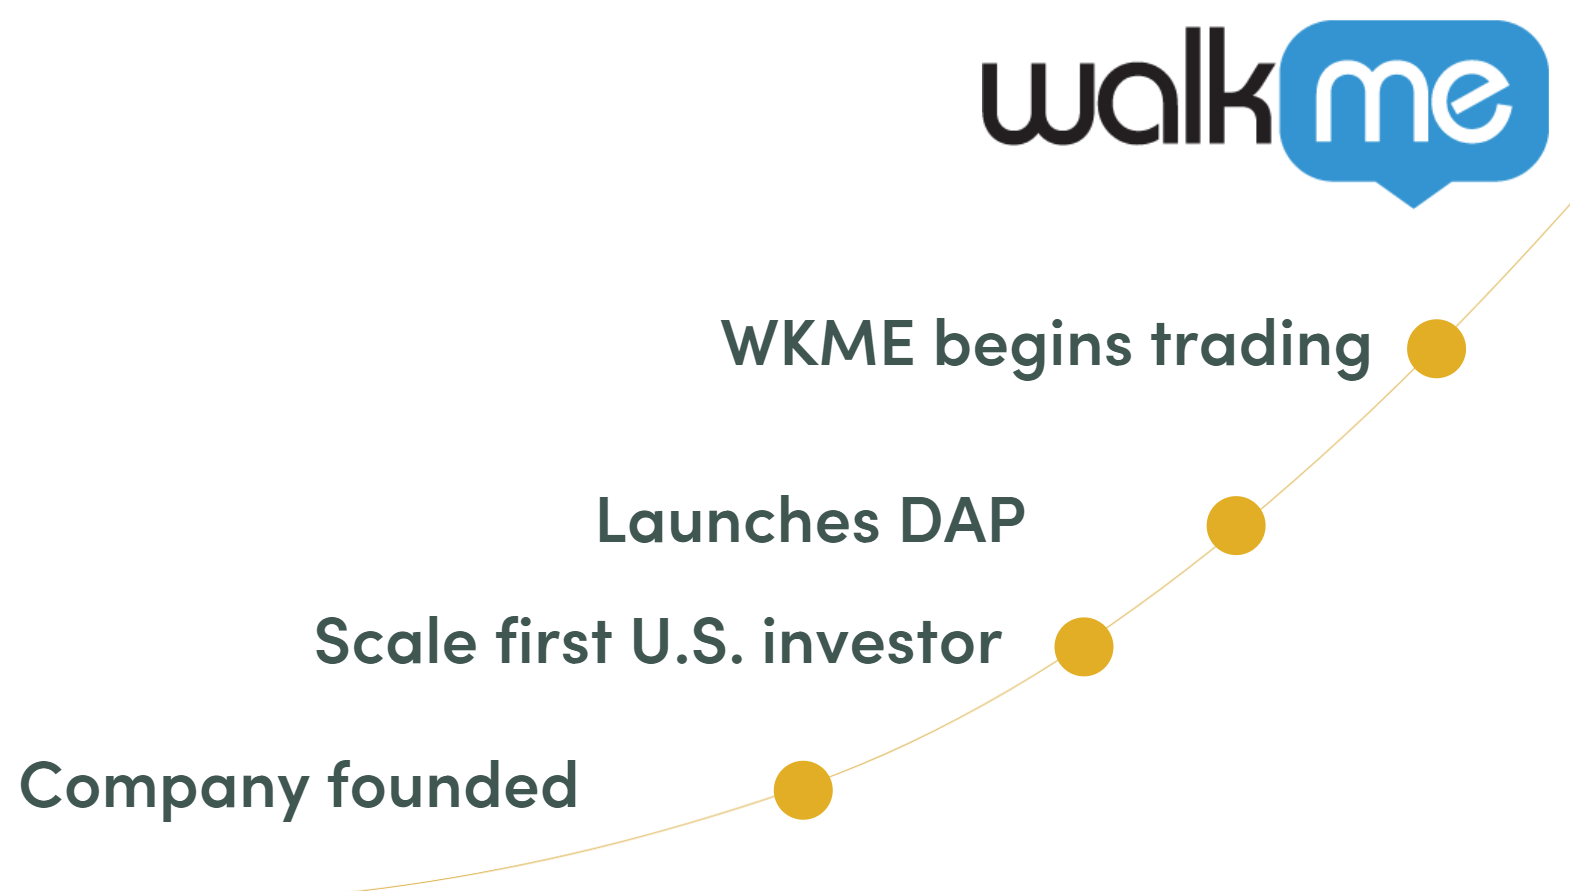 Congratulations Team WalkMe on today's IPO - timeline graphic